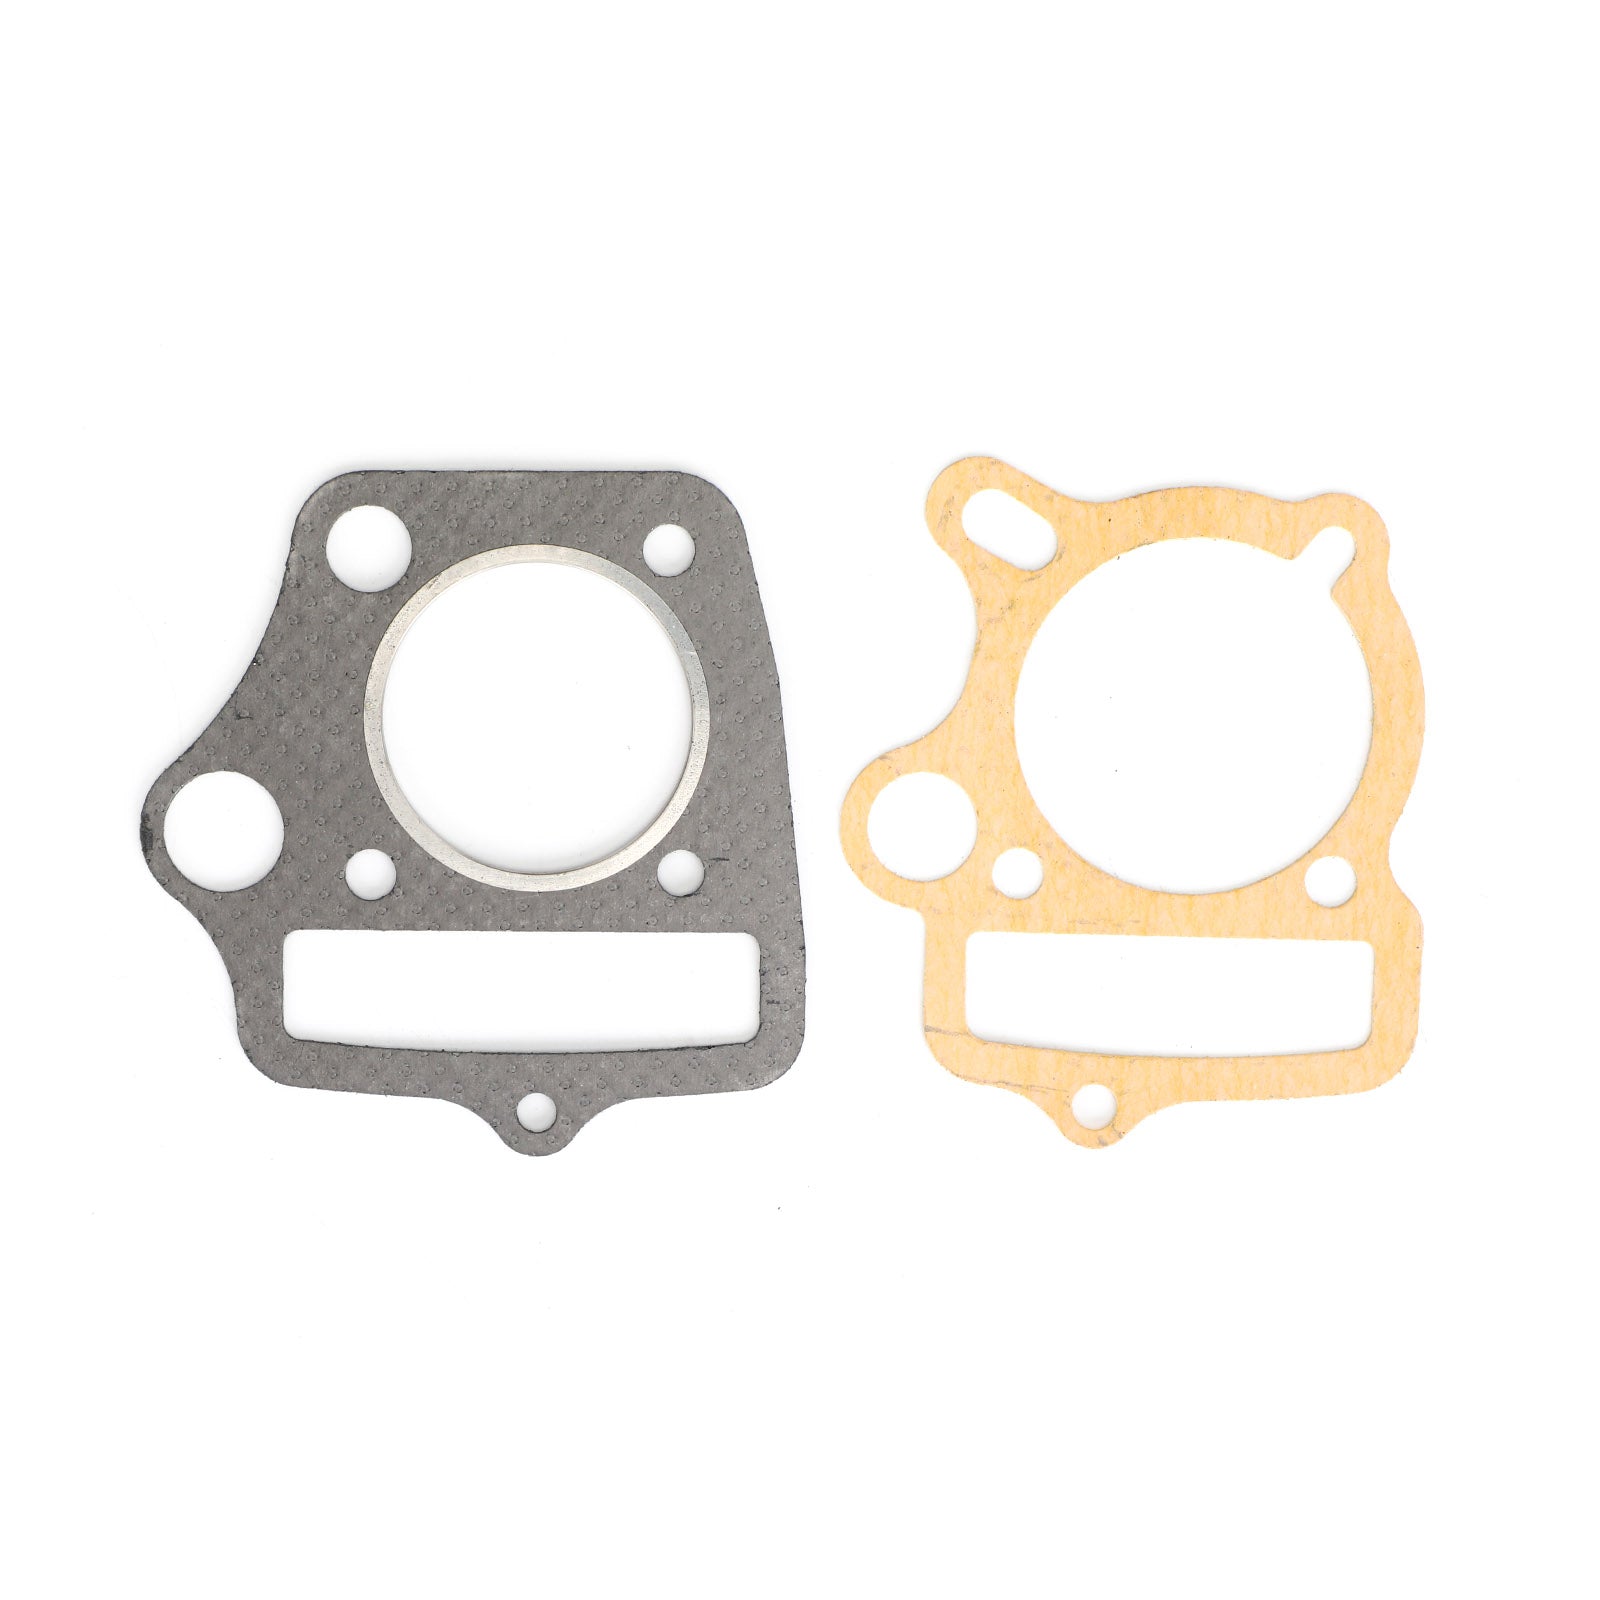 XL70 74-76 XR70R 97-03 CL70 69-72 ATC70 78-85 Cylinder Piston Rings Gaskets Top End Kit